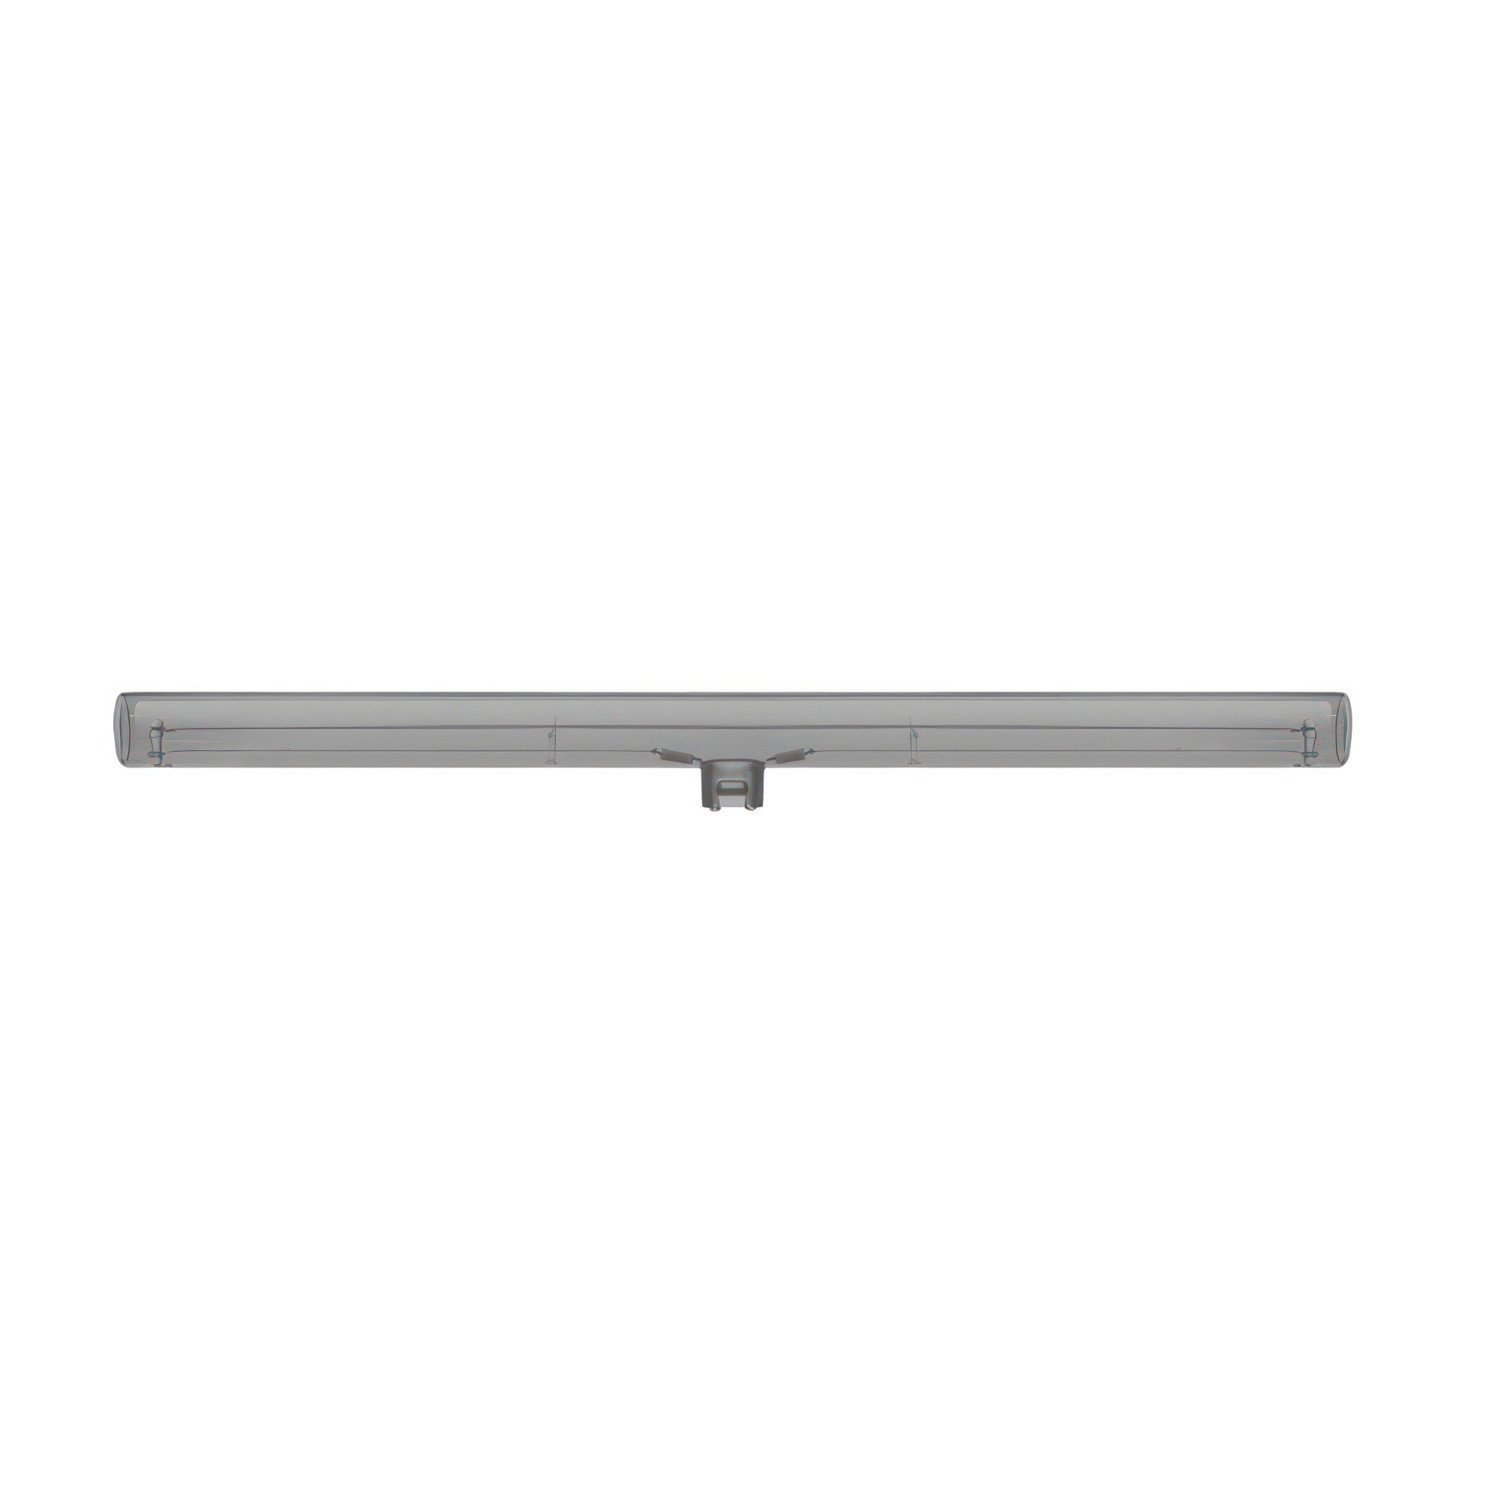 Lampadina LED Smoky Grey Lineare S14d - lunghezza 500 mm 8W 220Lm 1900K Dimmerabile